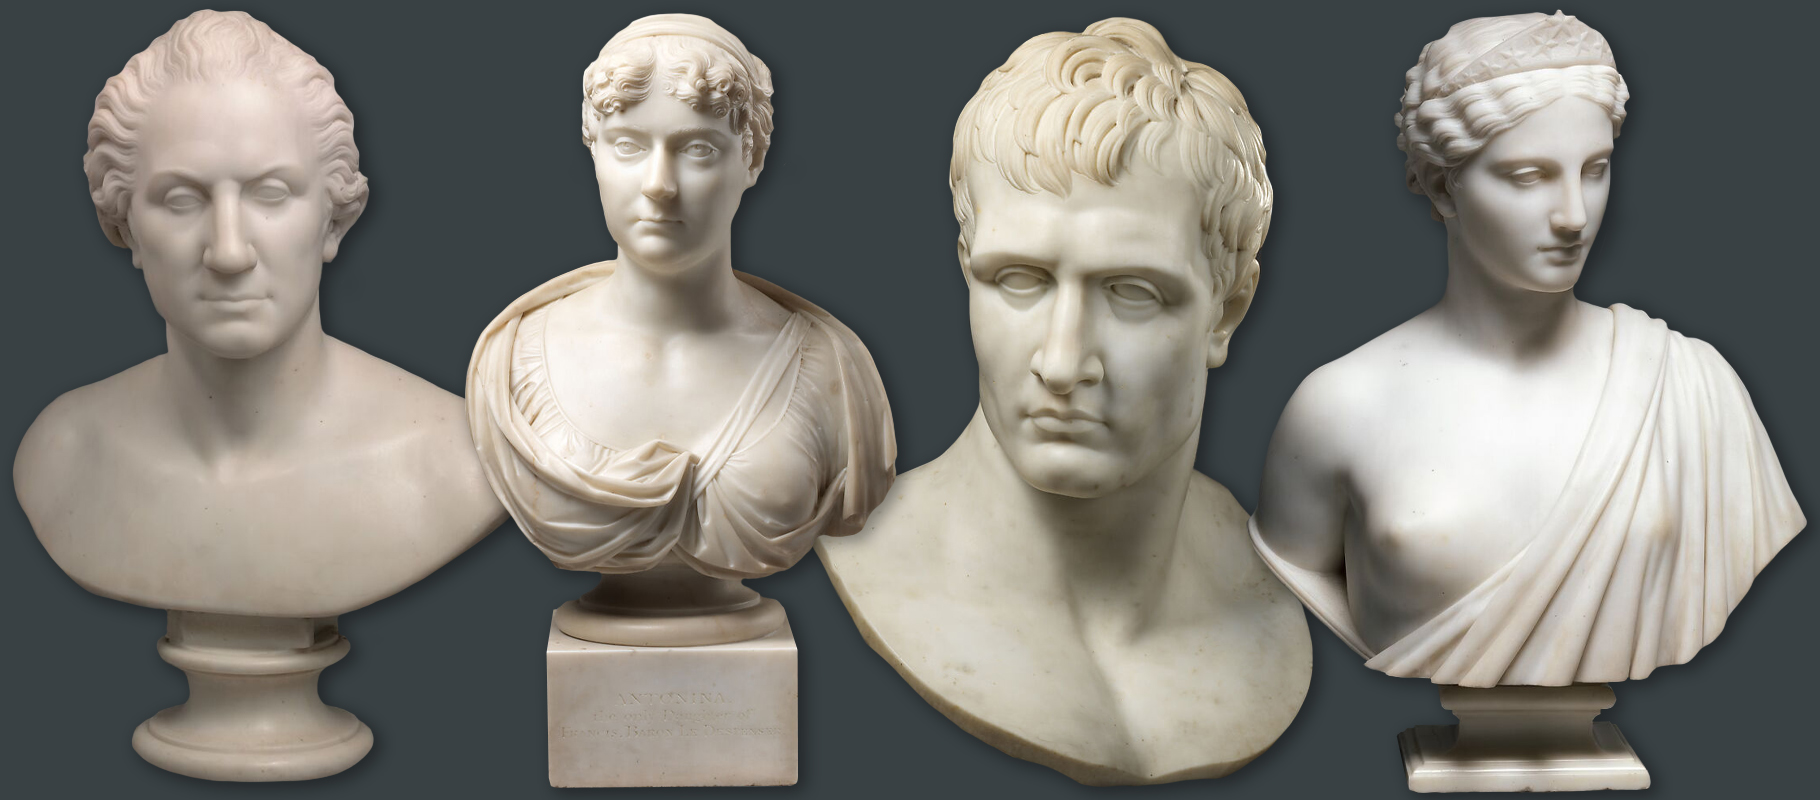 19th century marble busts